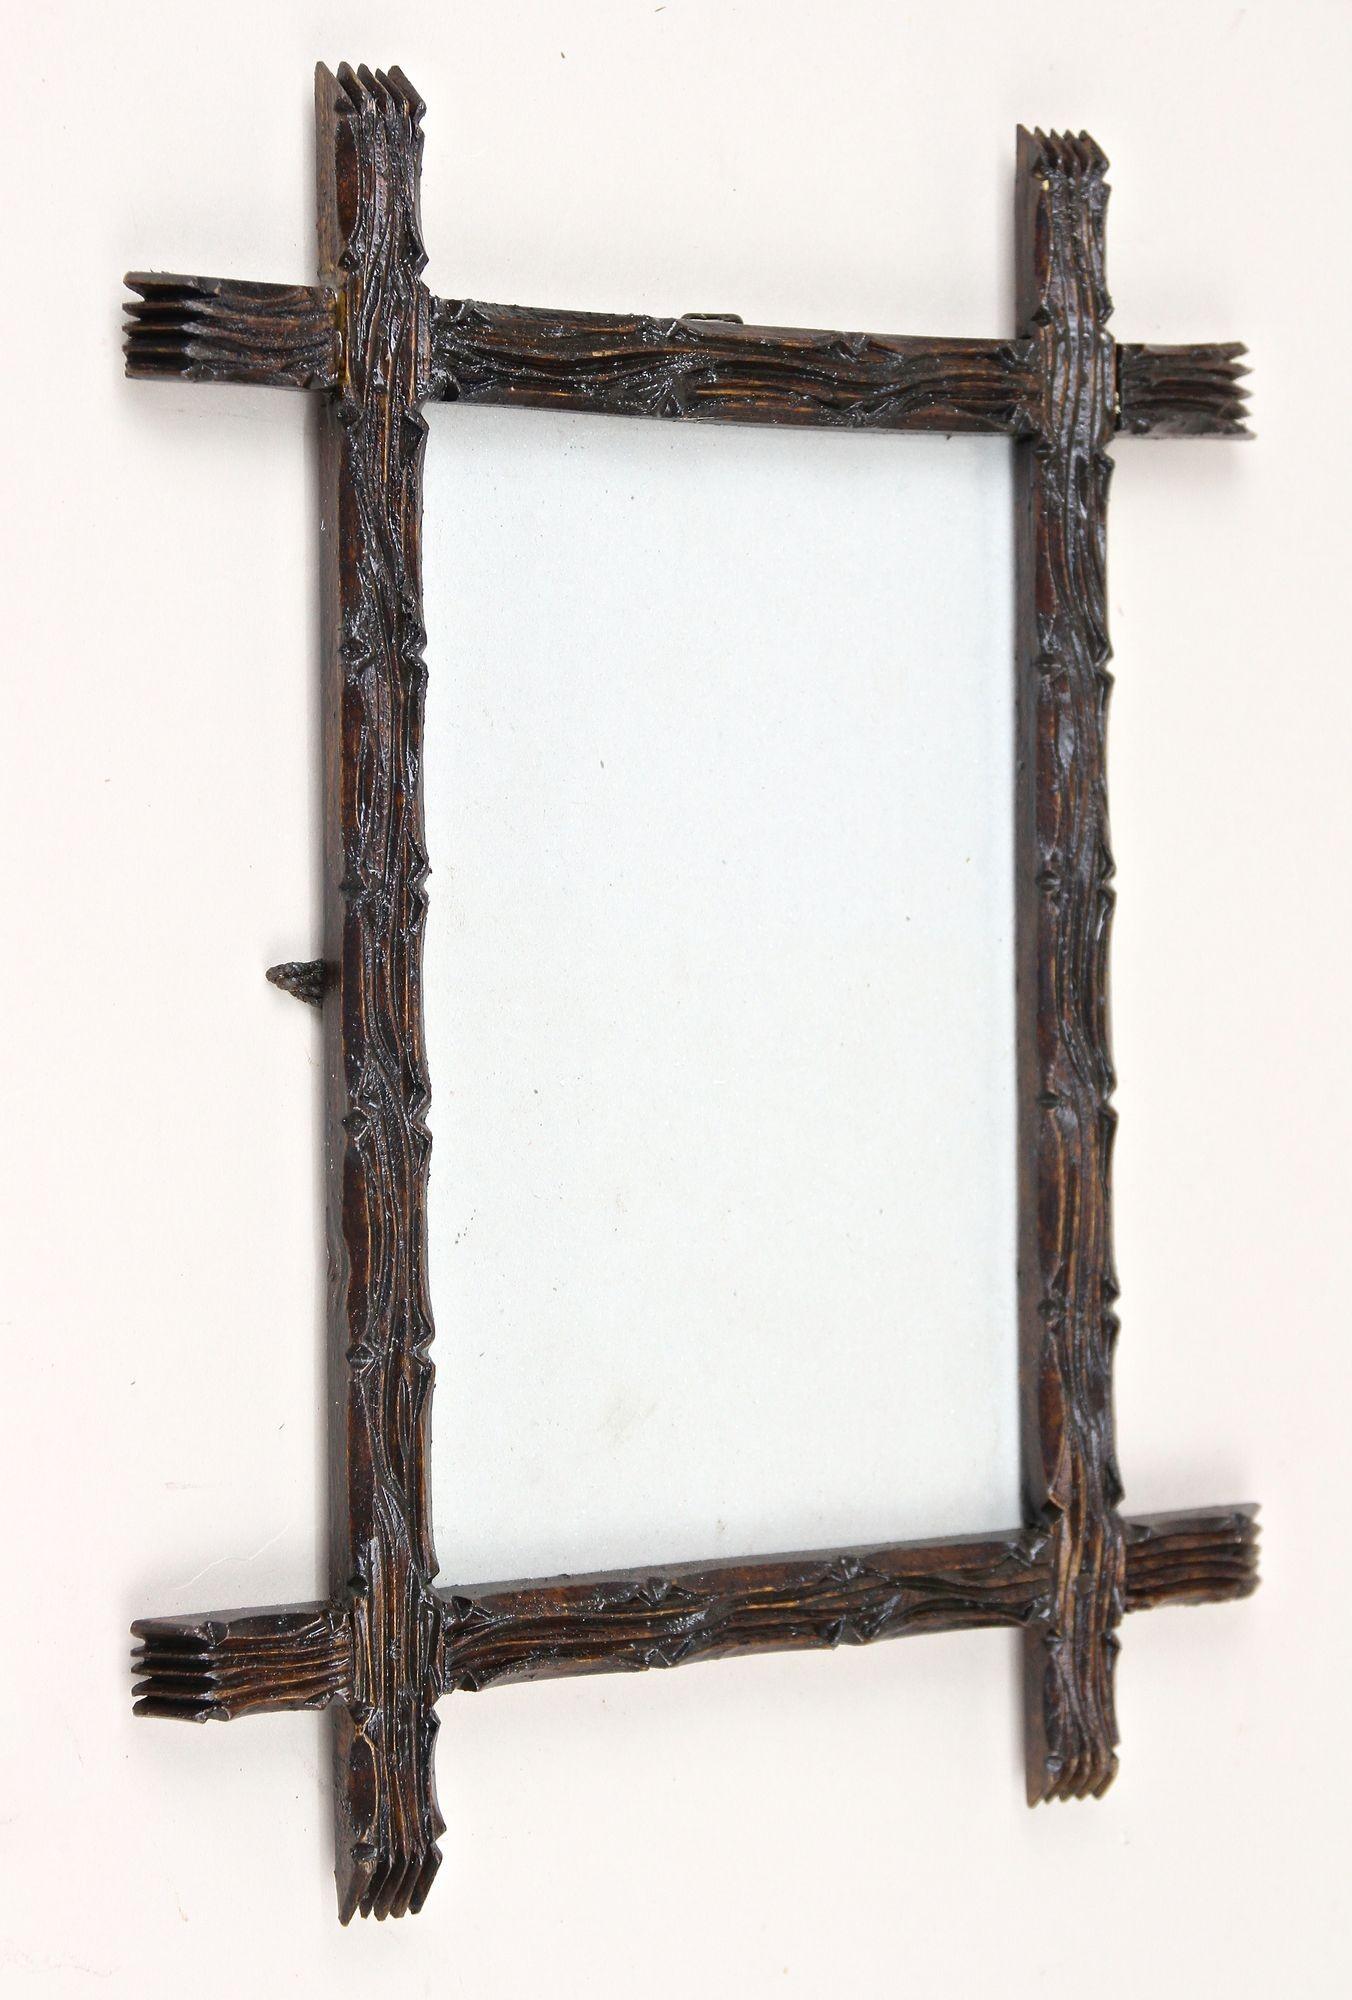 Elaborately handcarved rustic Black Forest photo frame from the 19th century around 1860 in Austria. Crafted out of bass wood this antique photo frame shows a charming traditional tree bark design which the dark brown almost black stained surfaces